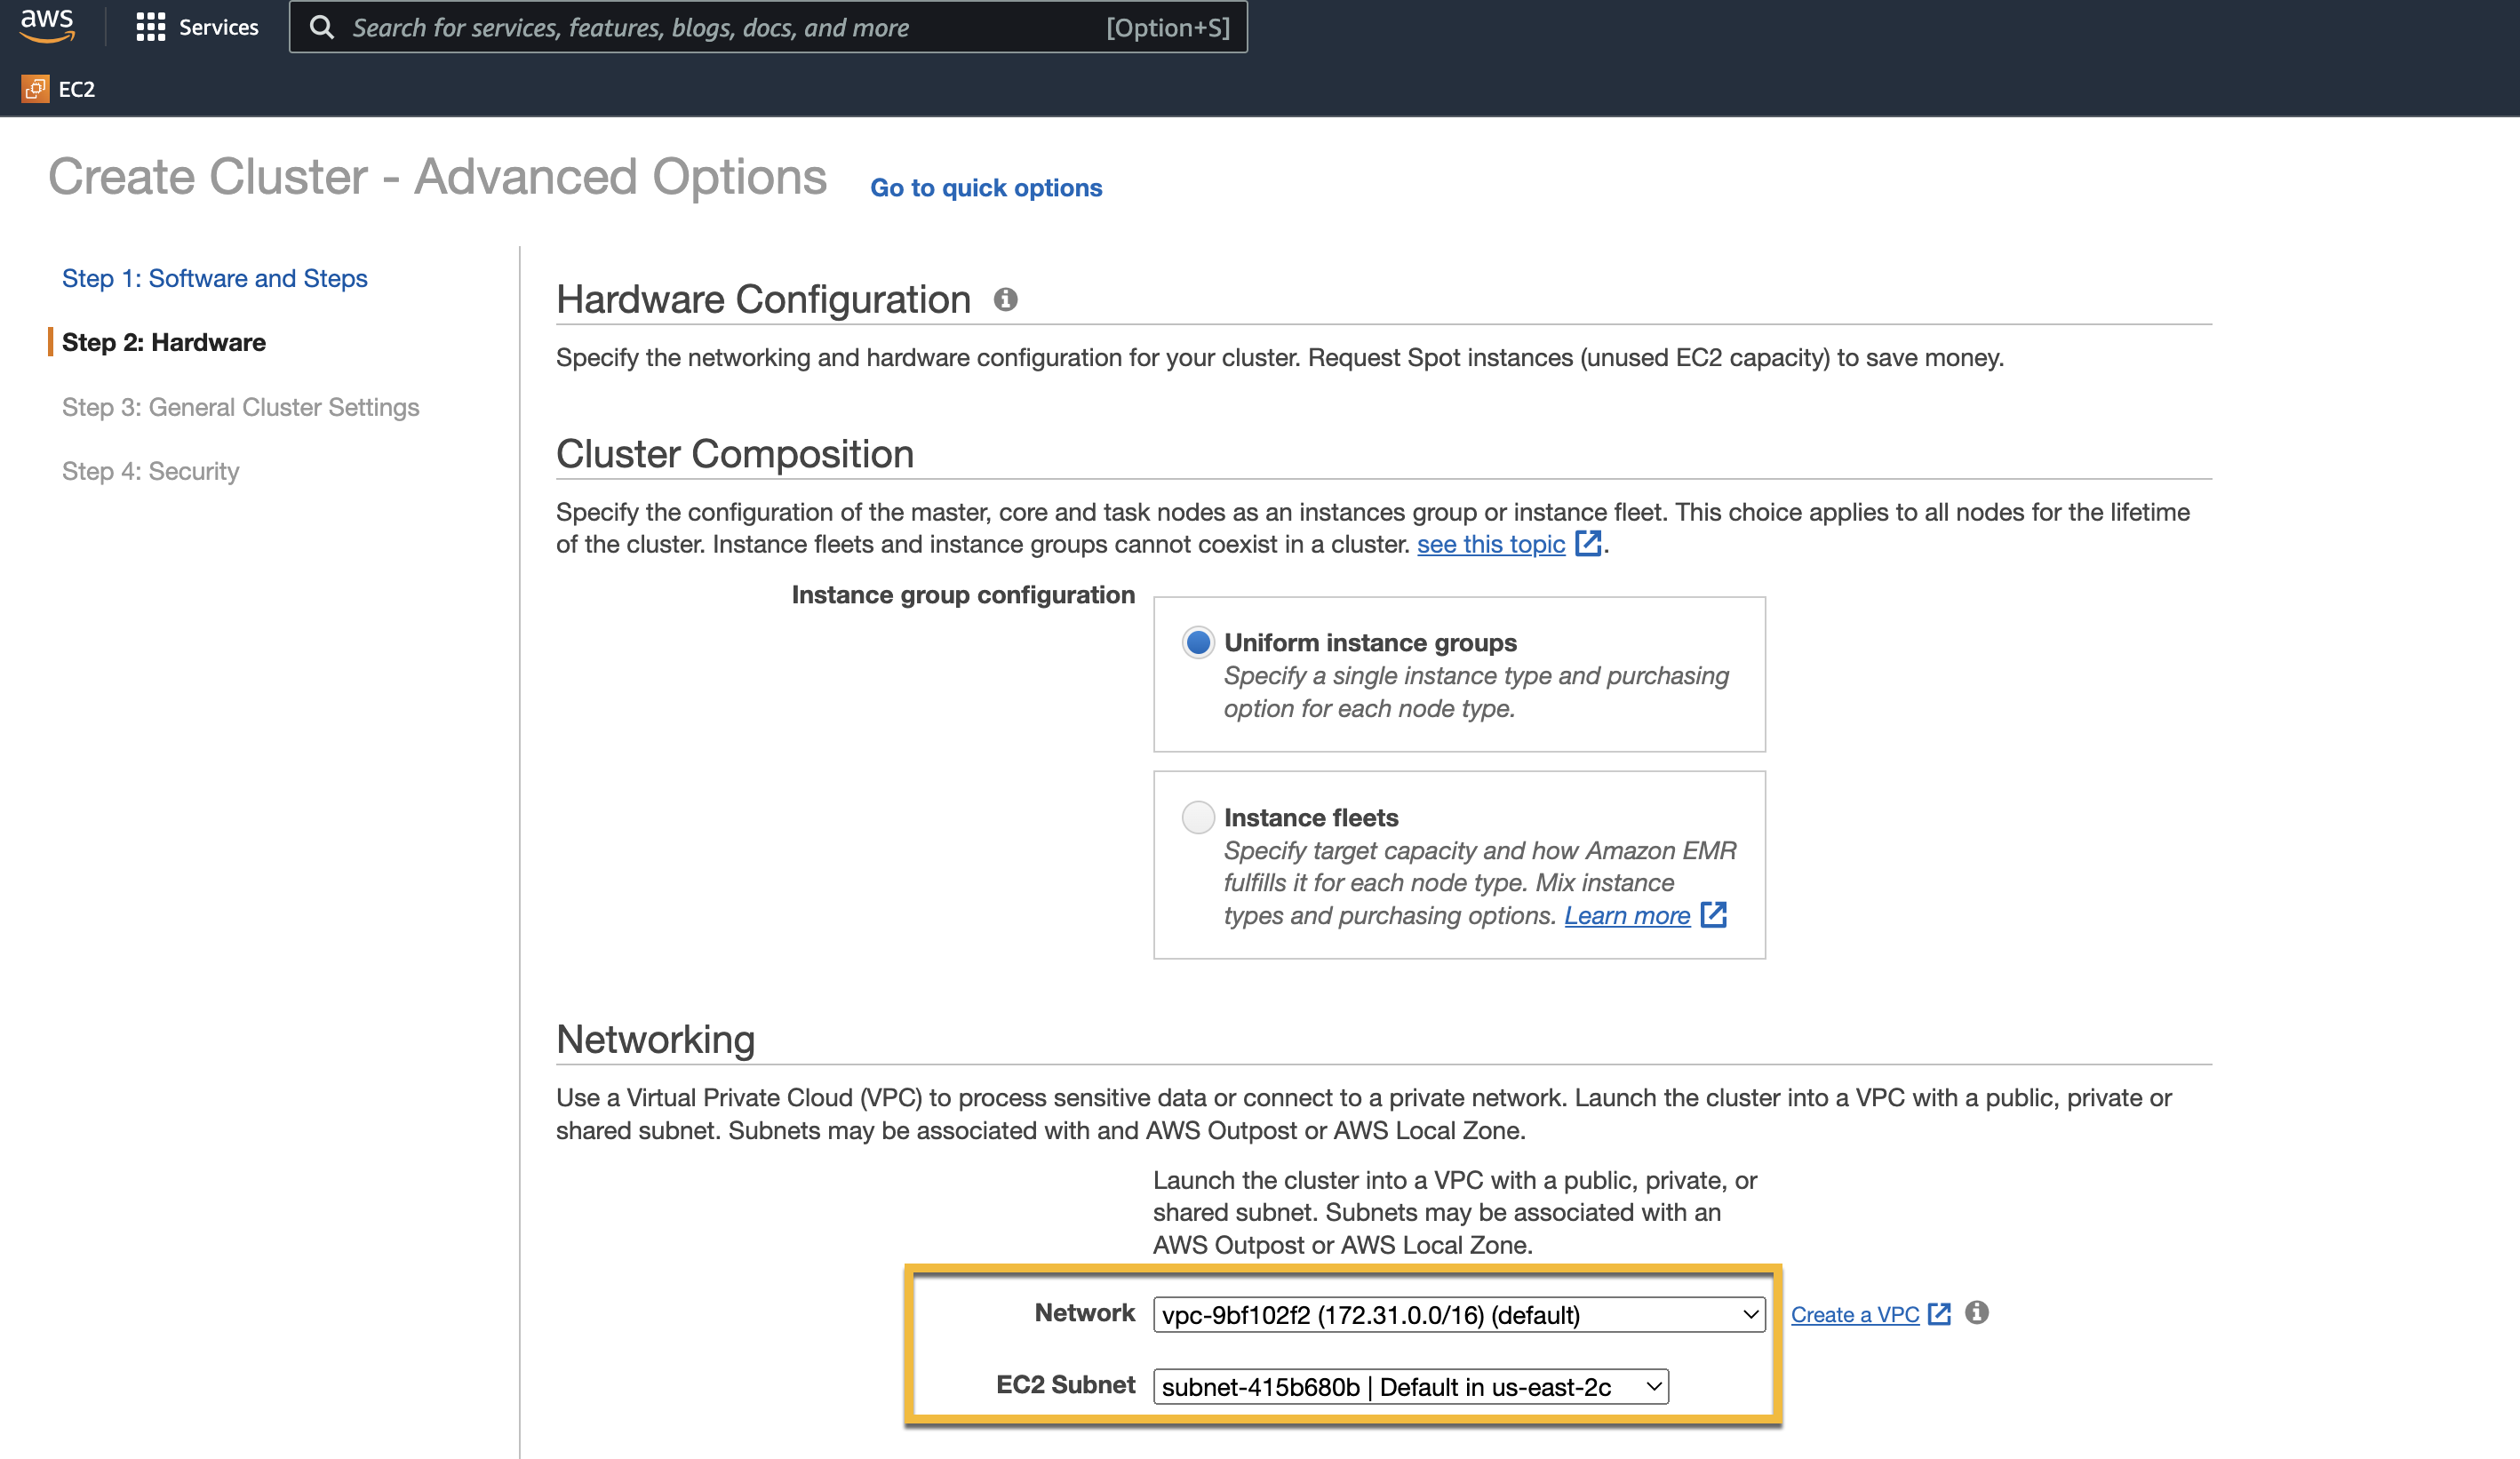 aws-marketpplace-step2a-advanced-options-hardwareconfig.png